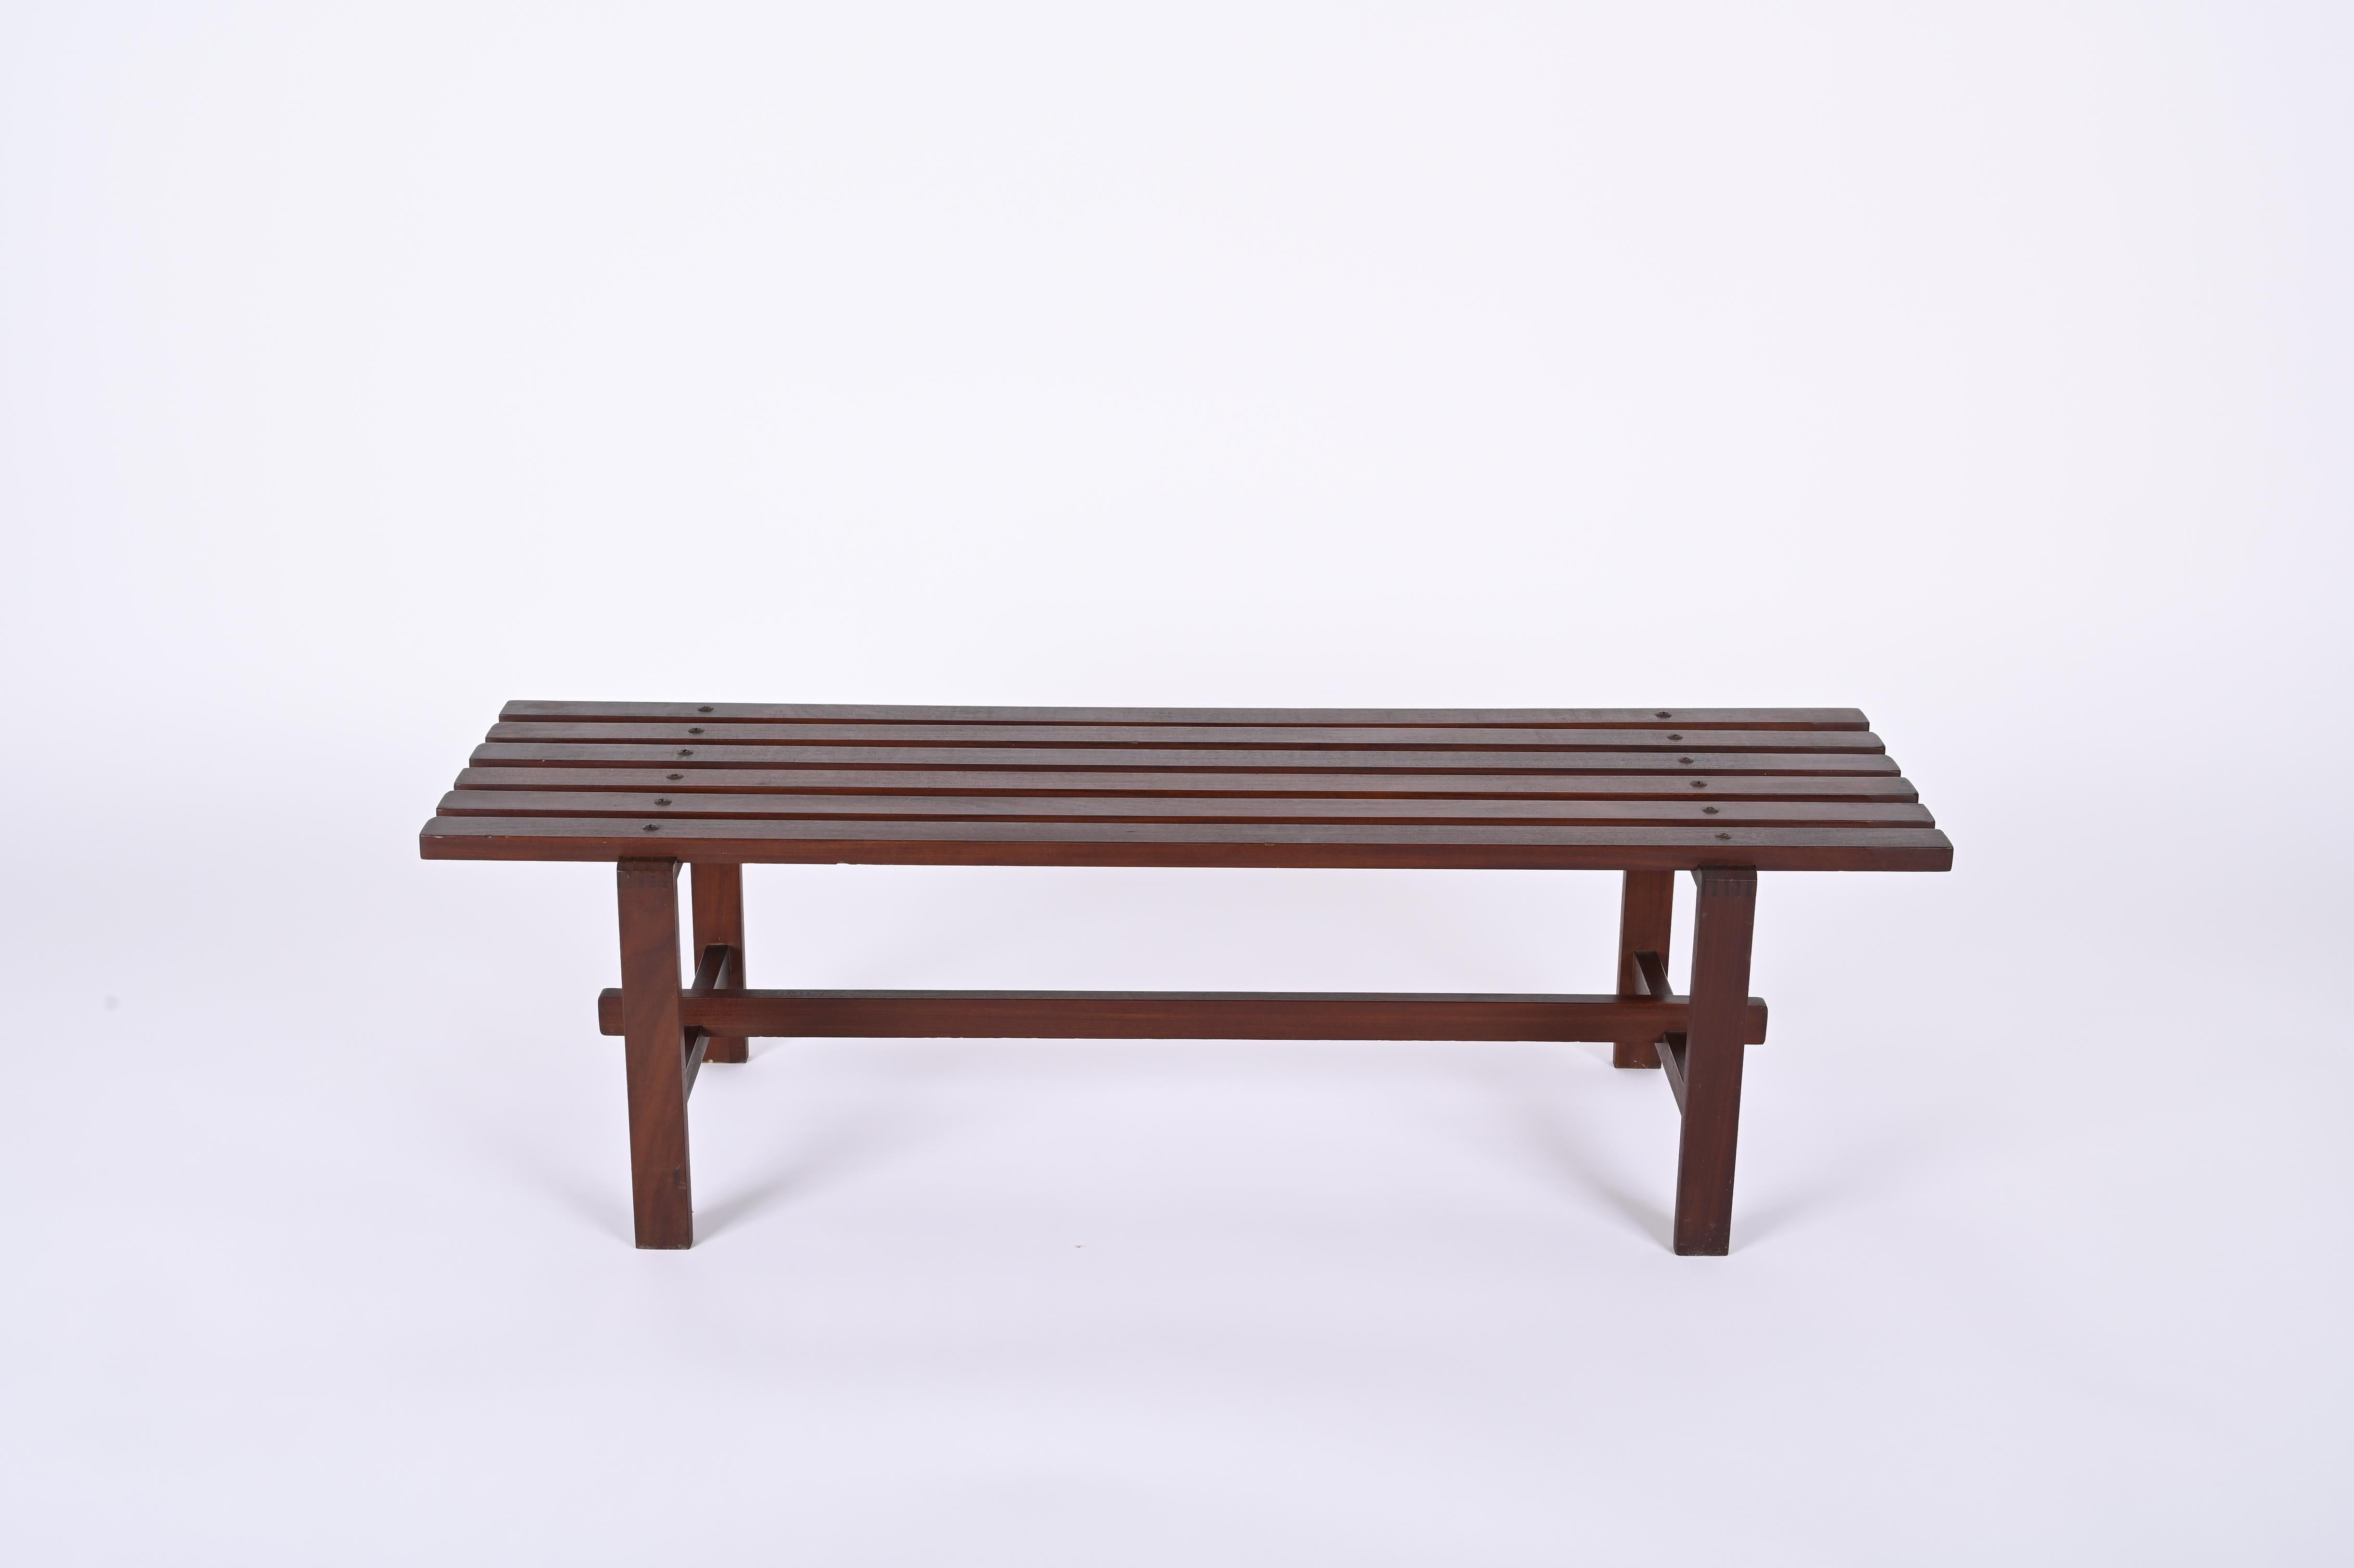 Marvellous midcentury bench made of dark brown teak wood. This astonishing item is a Scandinavian production from the 1960s. 

The piece is made of six horizontal wooden pieces for the seat and of a structure made of similar smaller